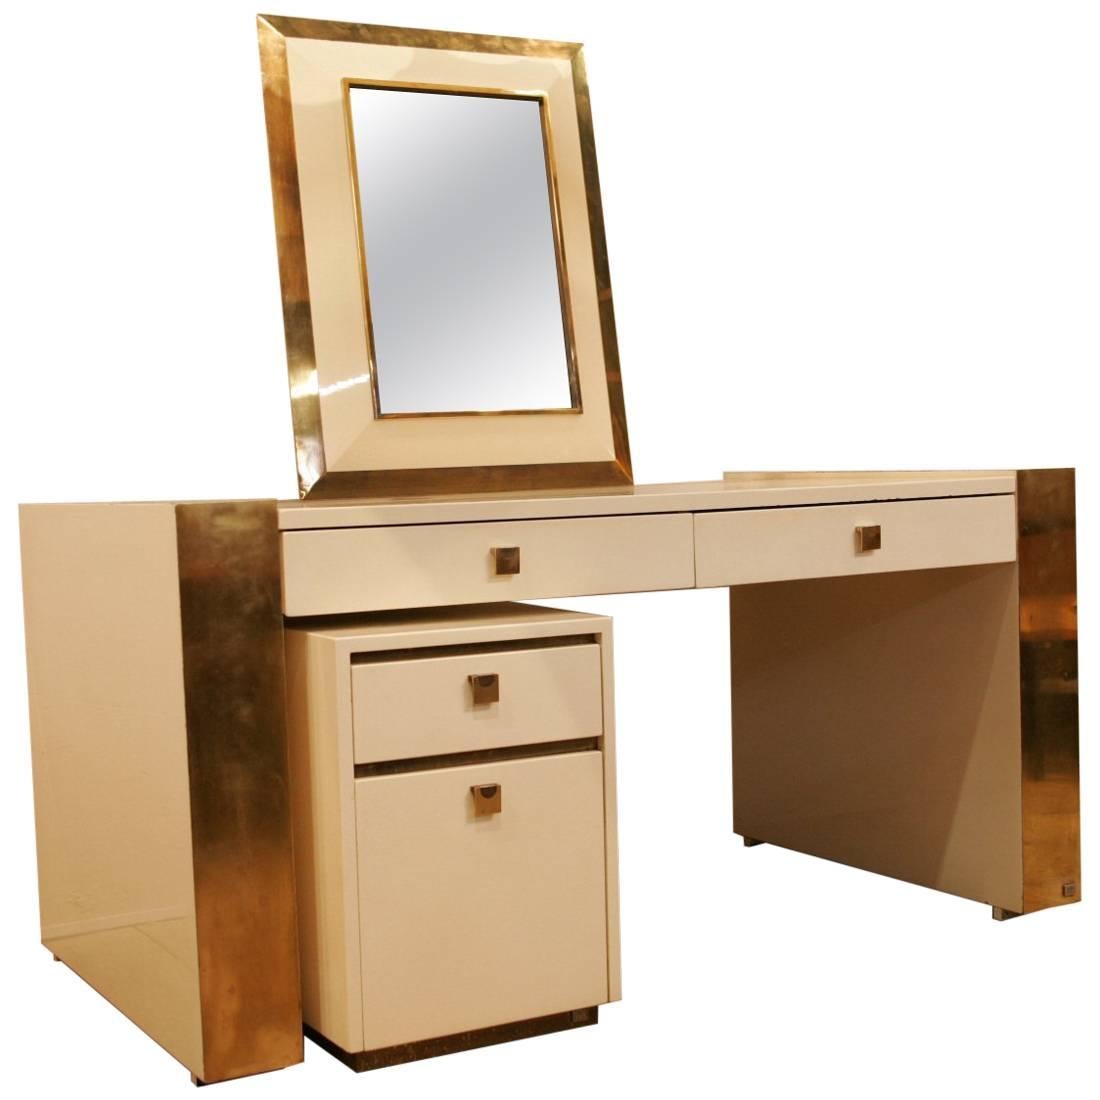 Mahé Jean-Claude, 1970 Desk and Mirror For Sale